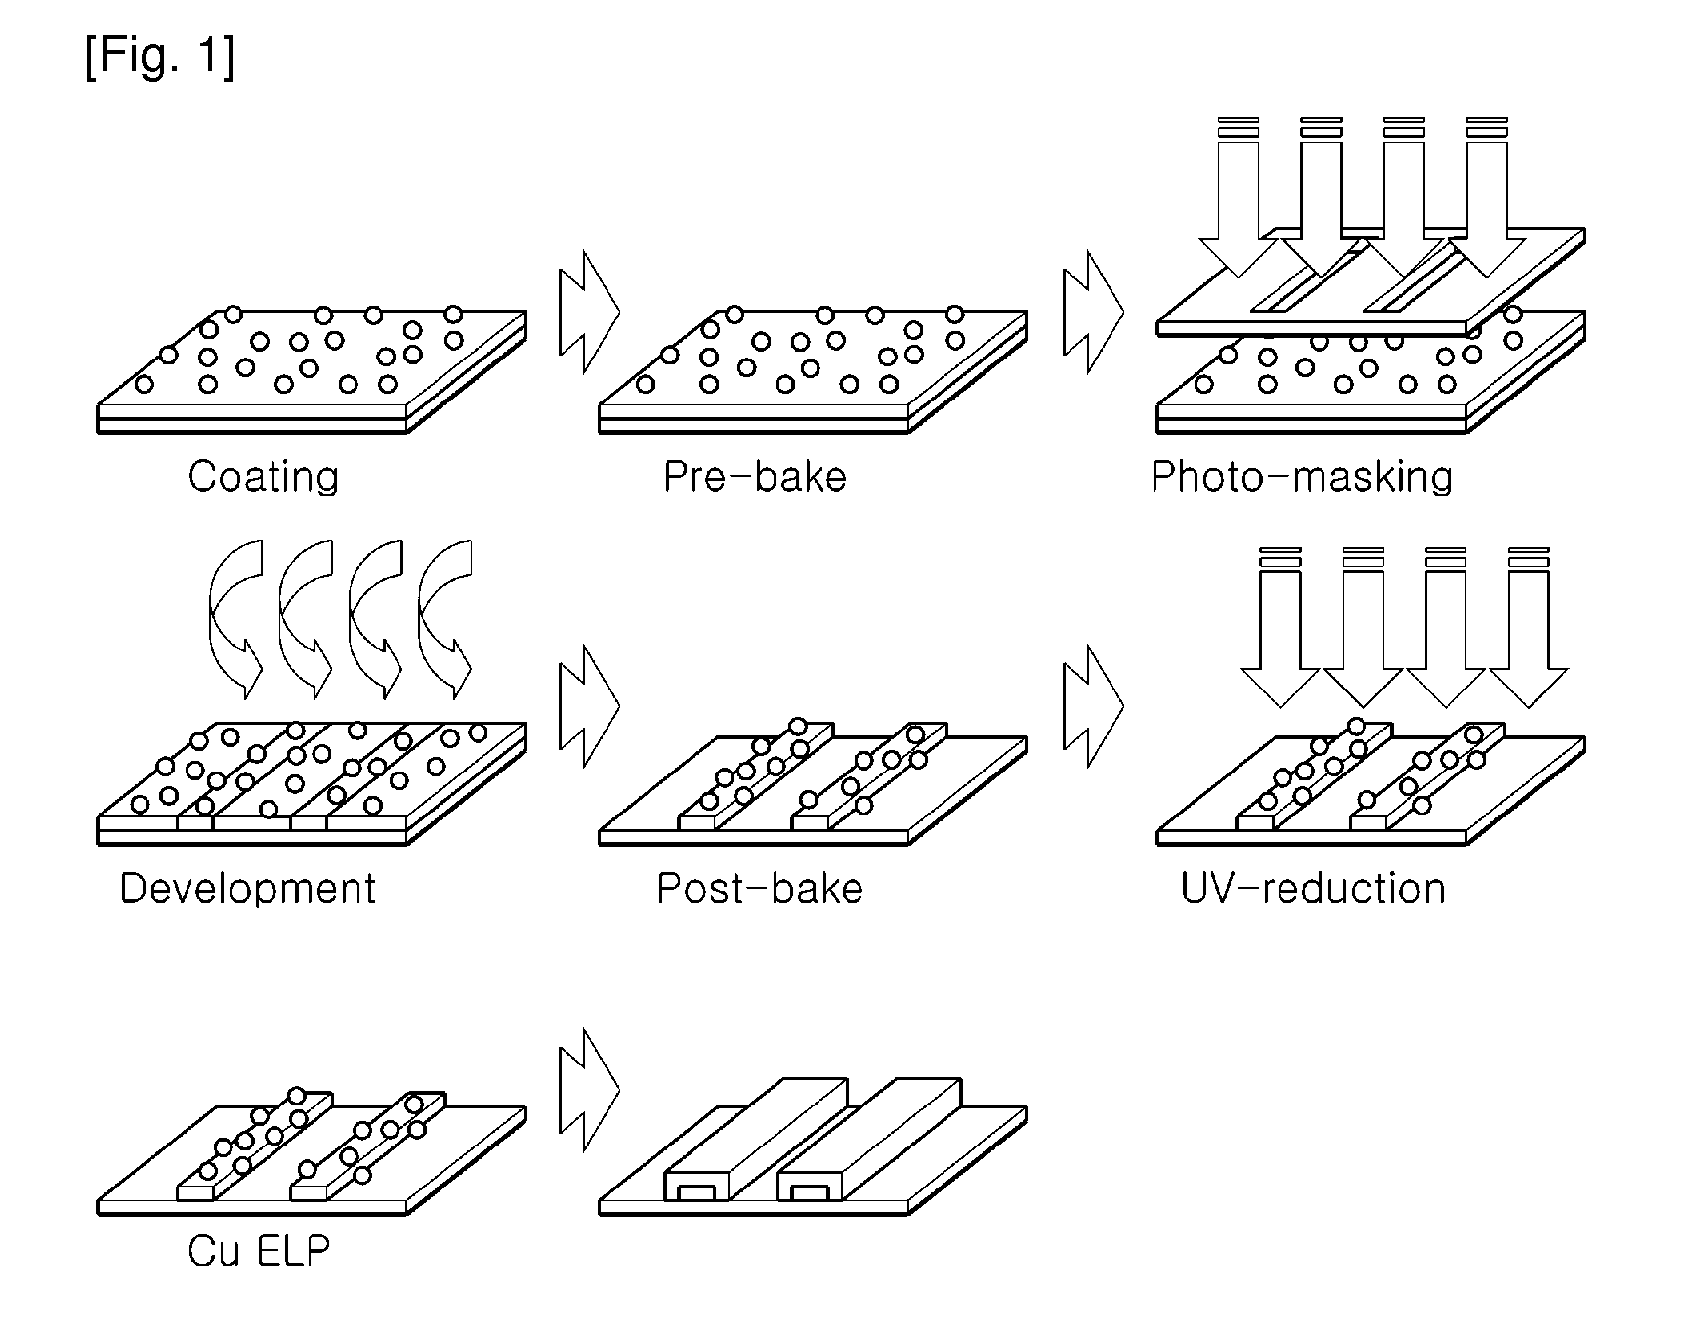 Resin composition containing catalyst precursor for electroless plating in forming electro-magnetic shielding layer, method of forming metallic pattern using the same, and metallic pattern formed by the same method